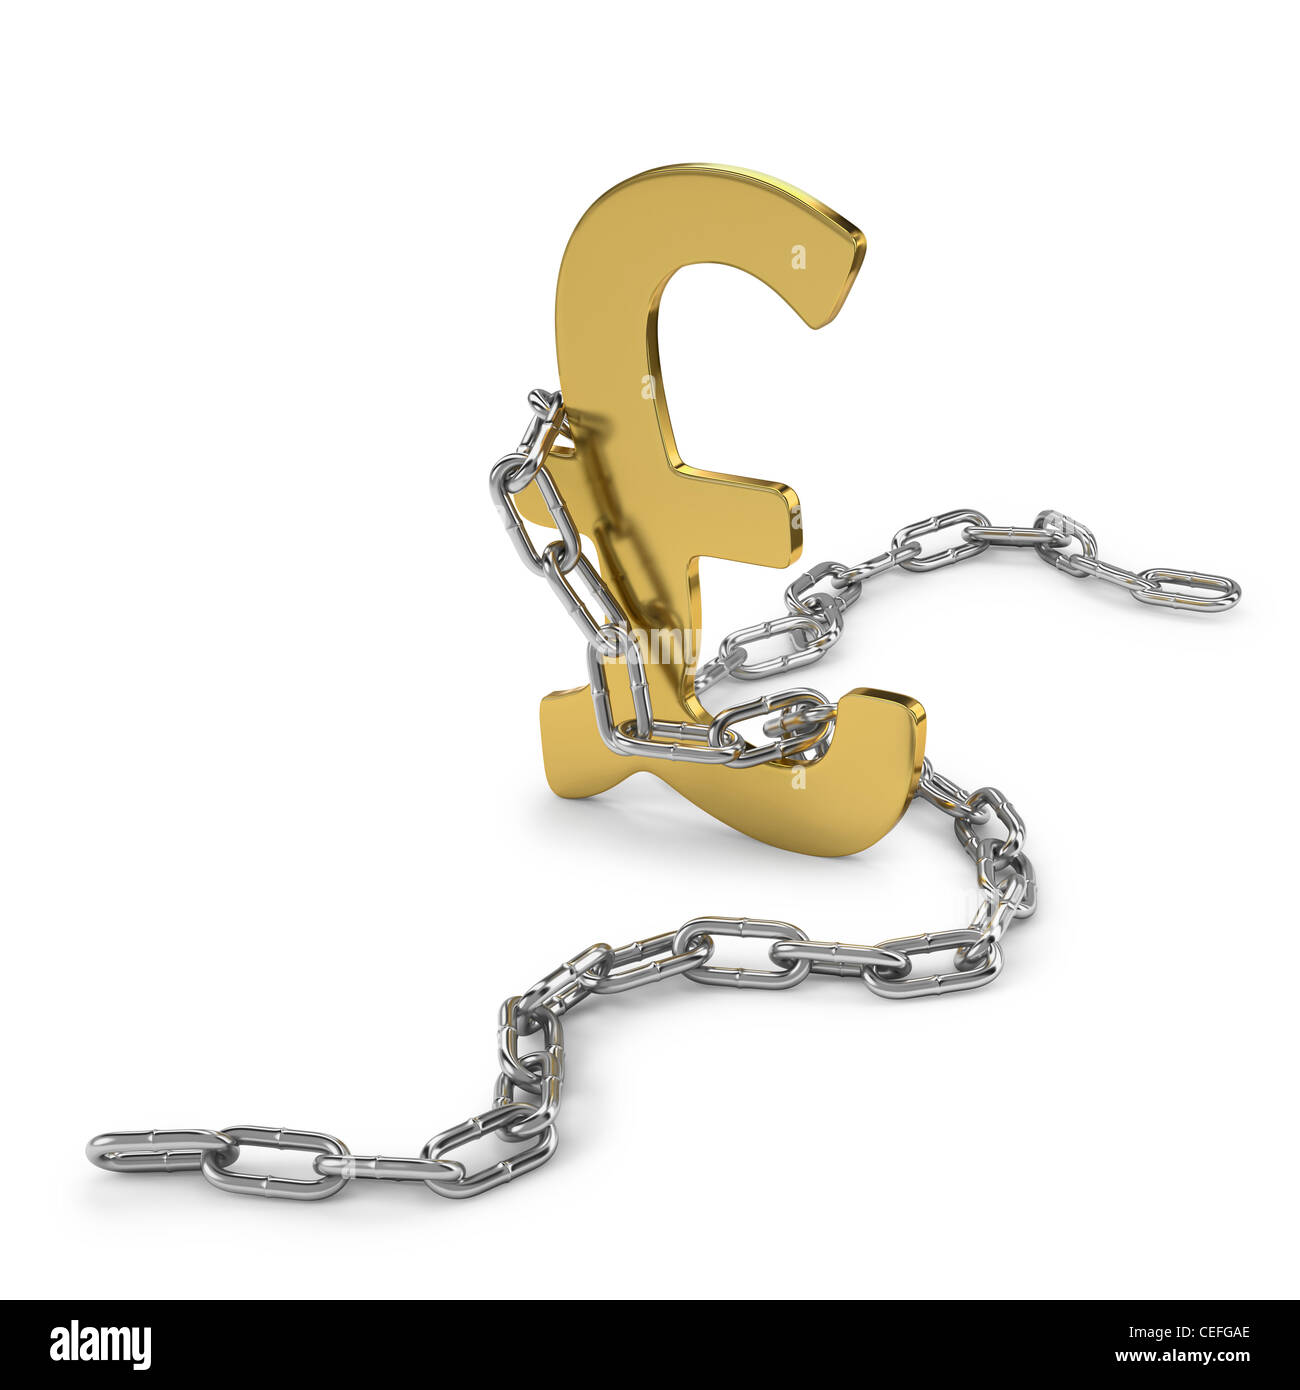 Pound currency symbol in chains as economic mismanagement Stock Photo